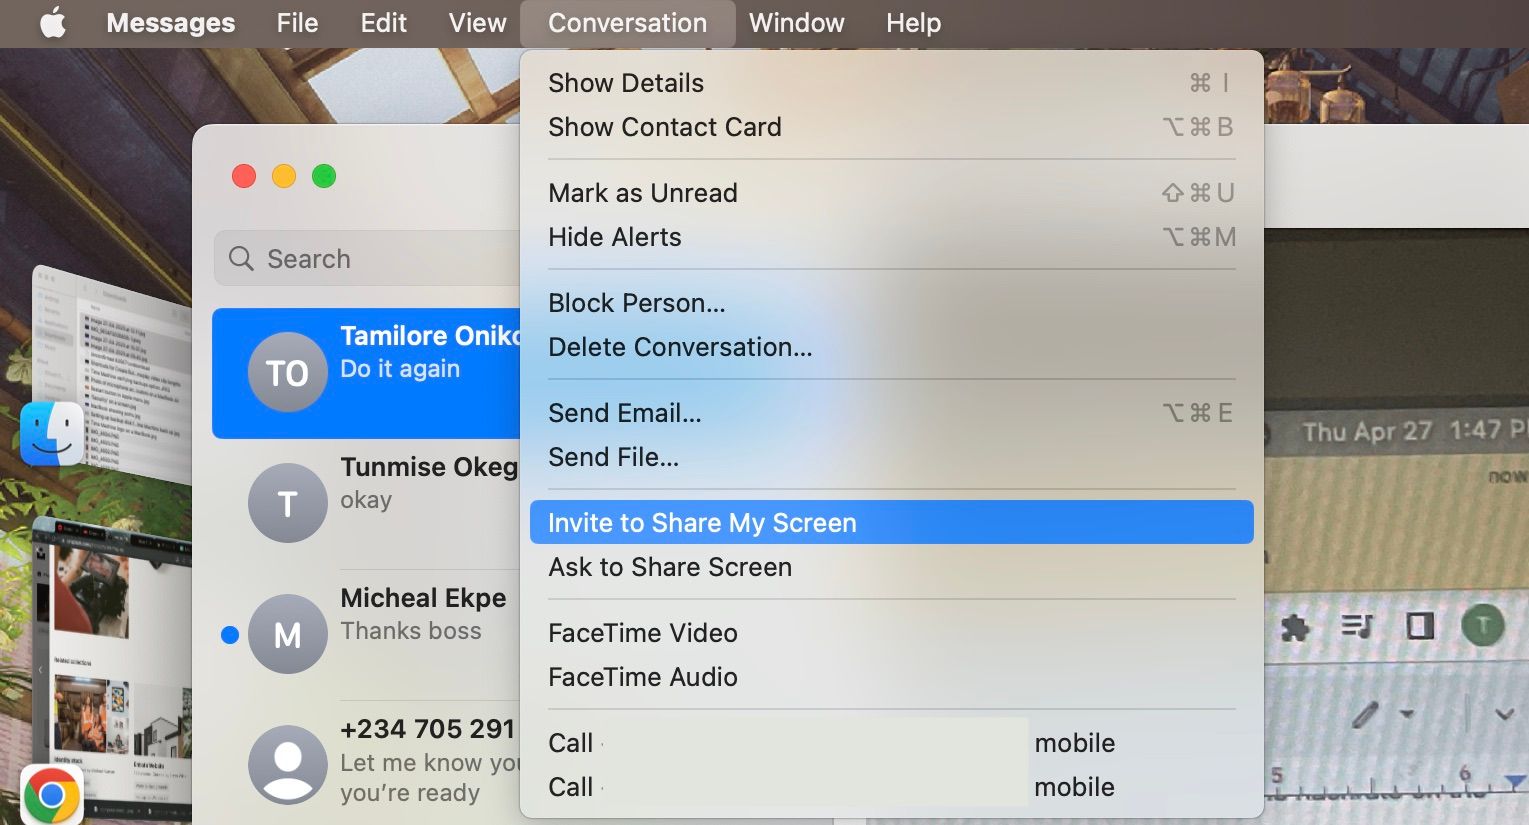 Screenshot of Messages displaying option to share screen in the Conversation menu